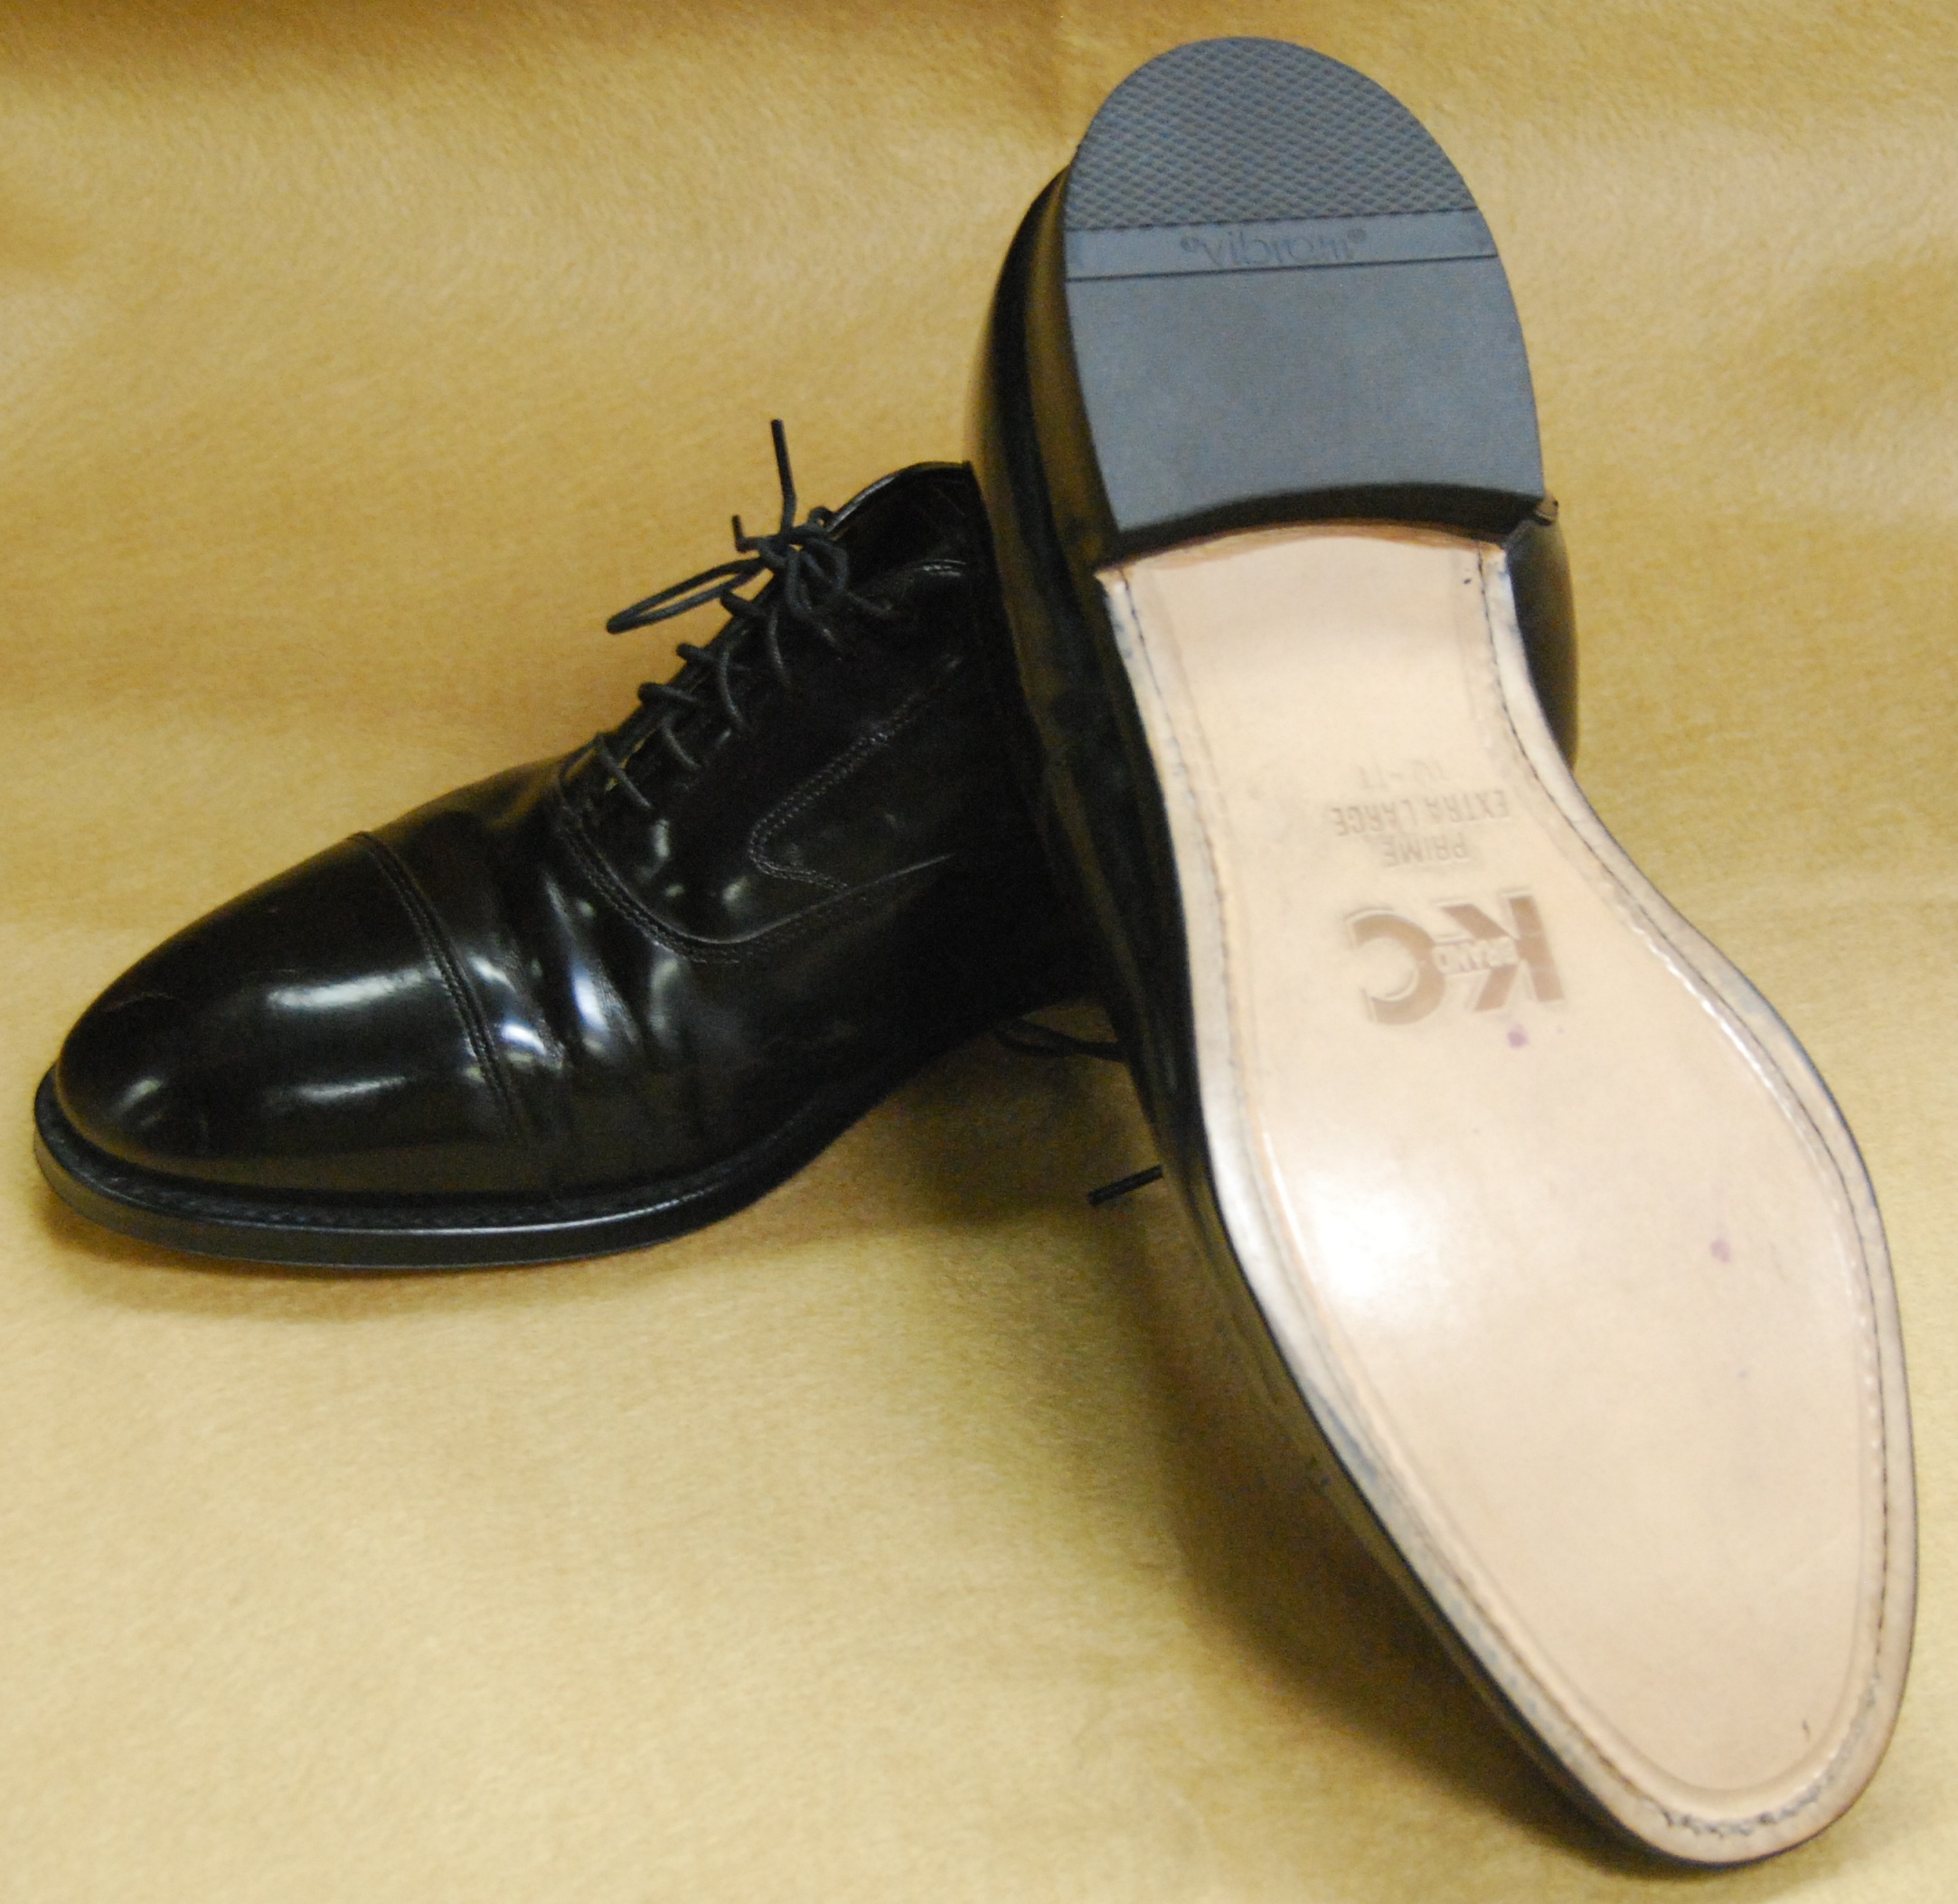 ... OR Out of State: 877.313.0675 for Resole and Shoe Repair by Mail Order